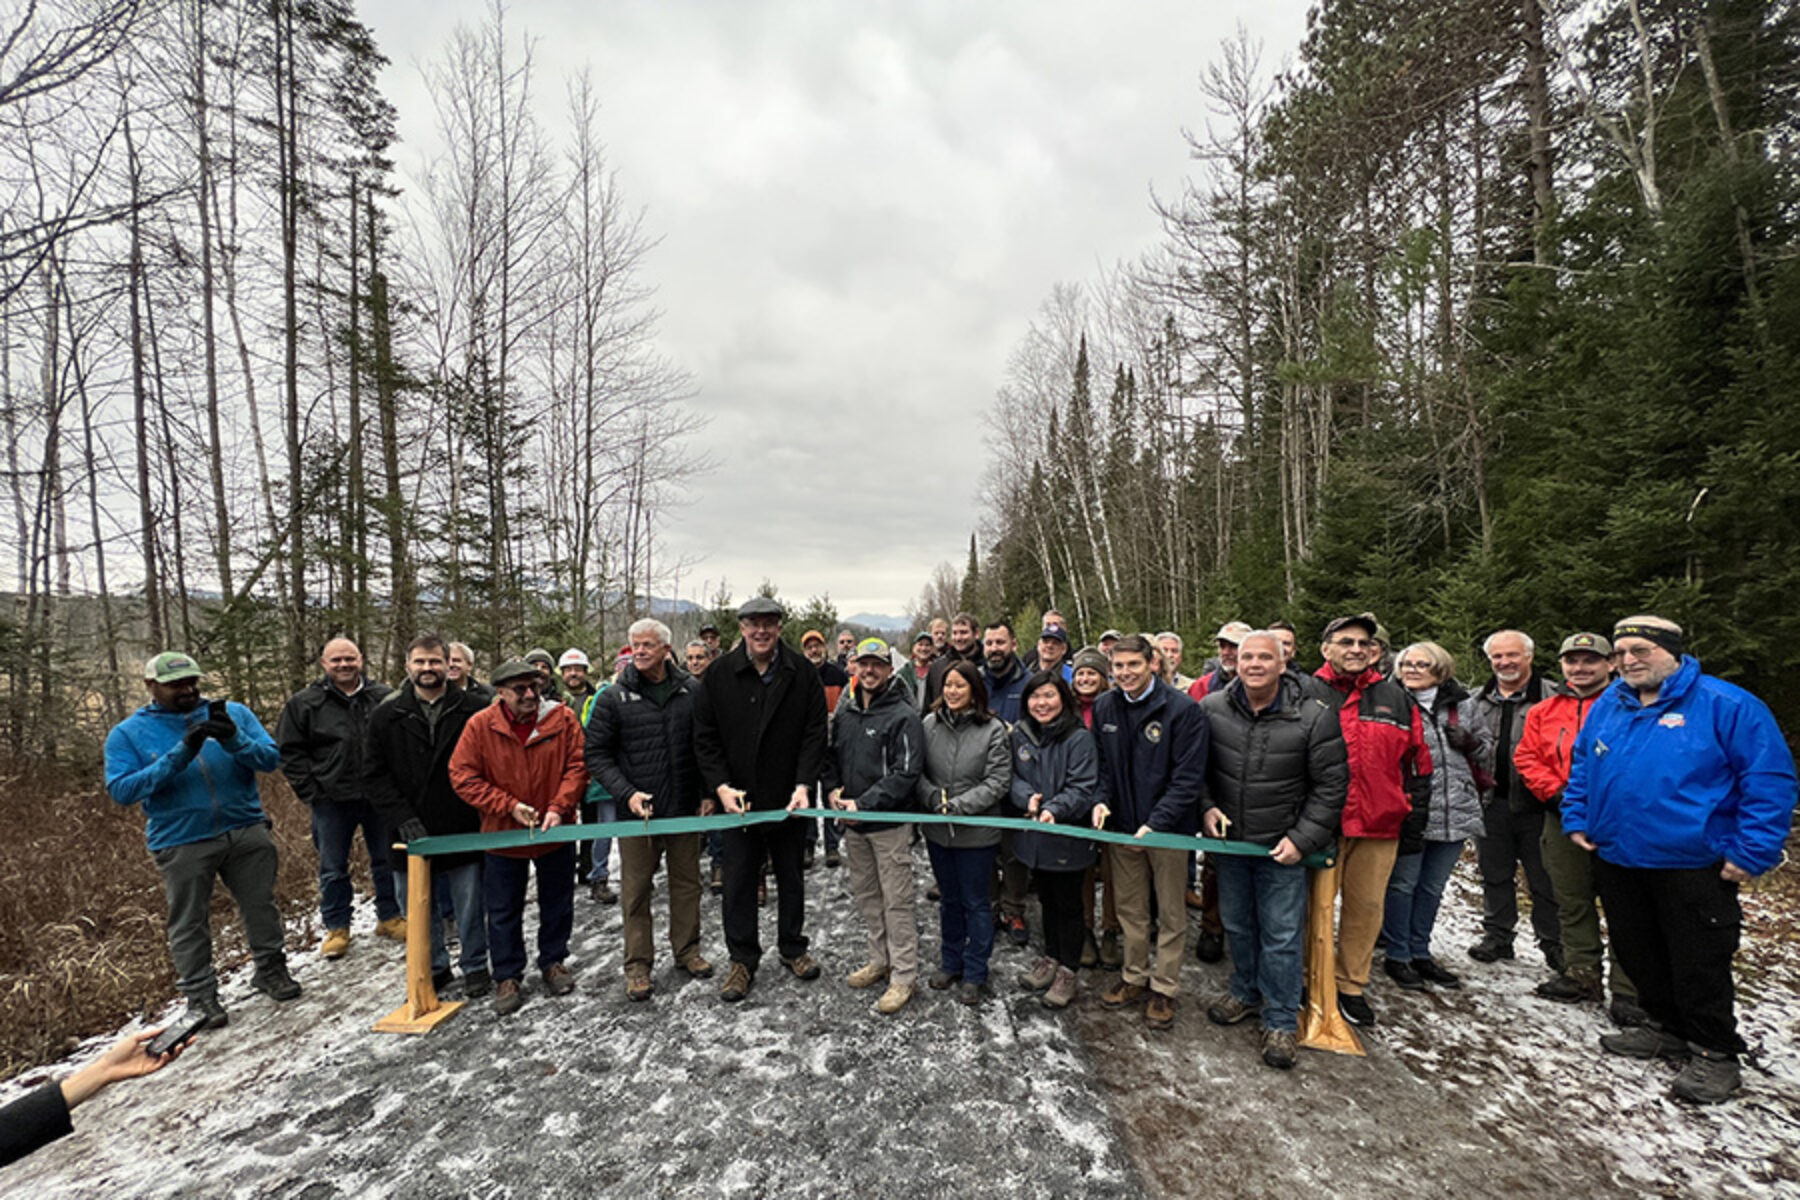 New York's Adirondack Rail Trail ribbon cutting | Photo courtesy New York State Department of Environmental Conservation